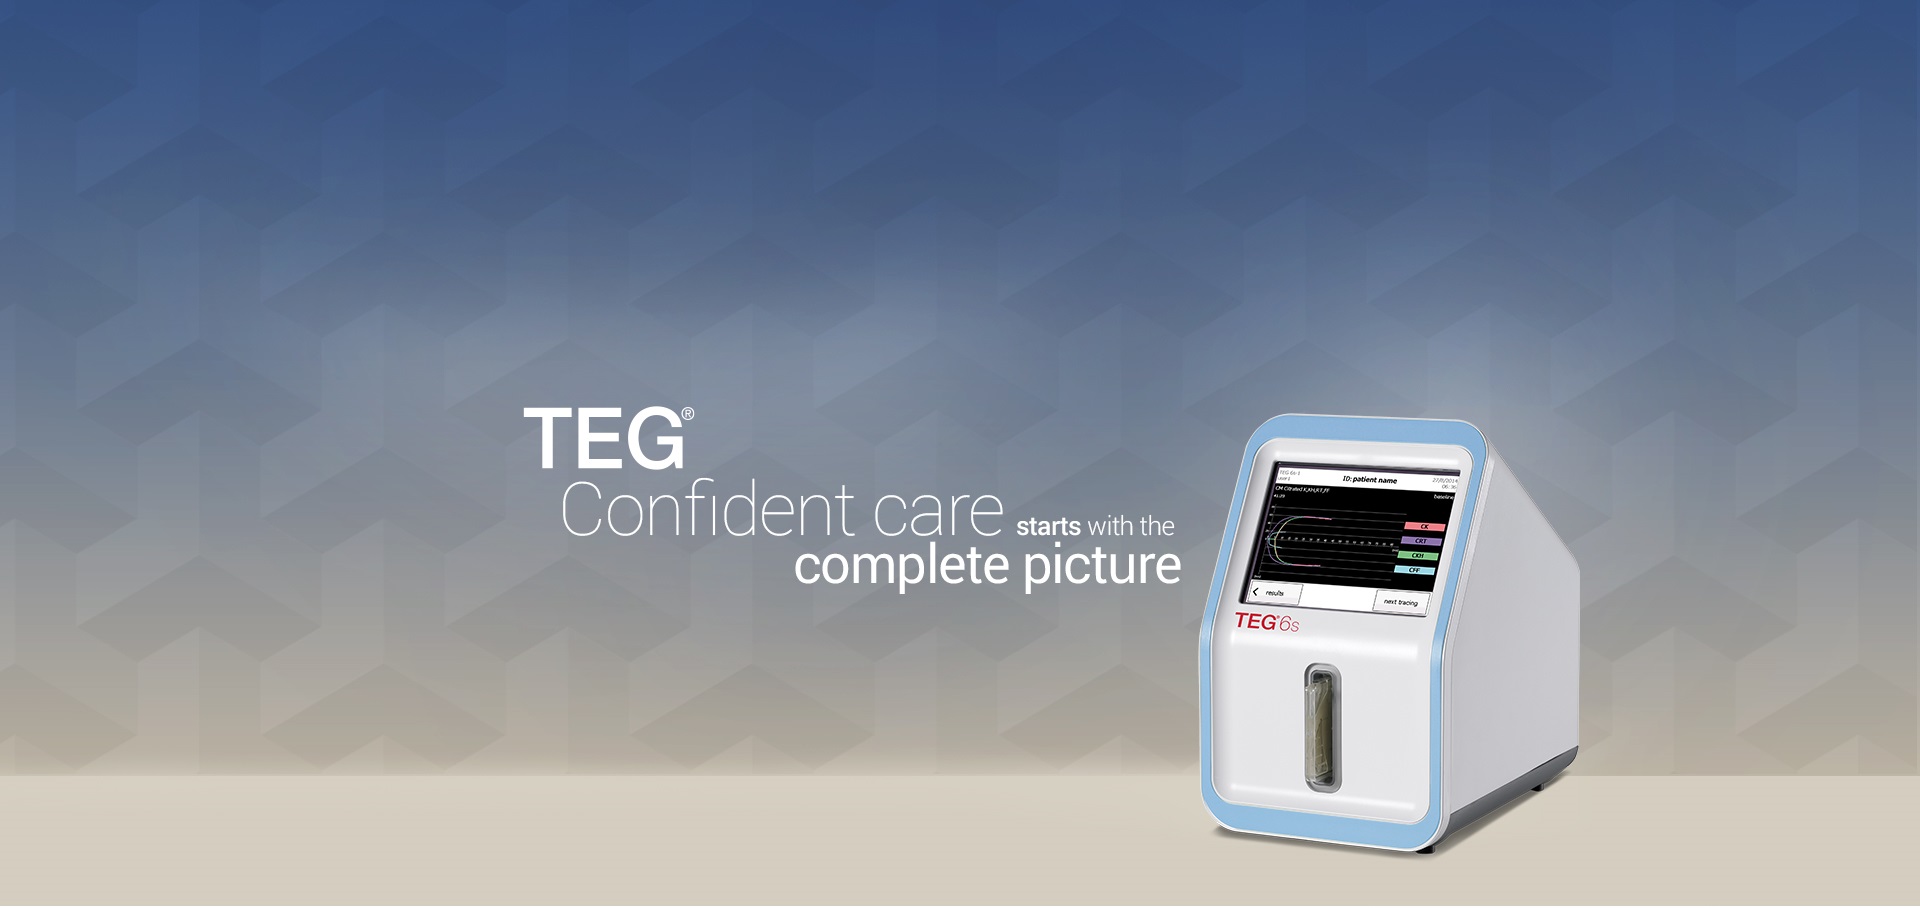 TEG Confident care starts with the complete picture